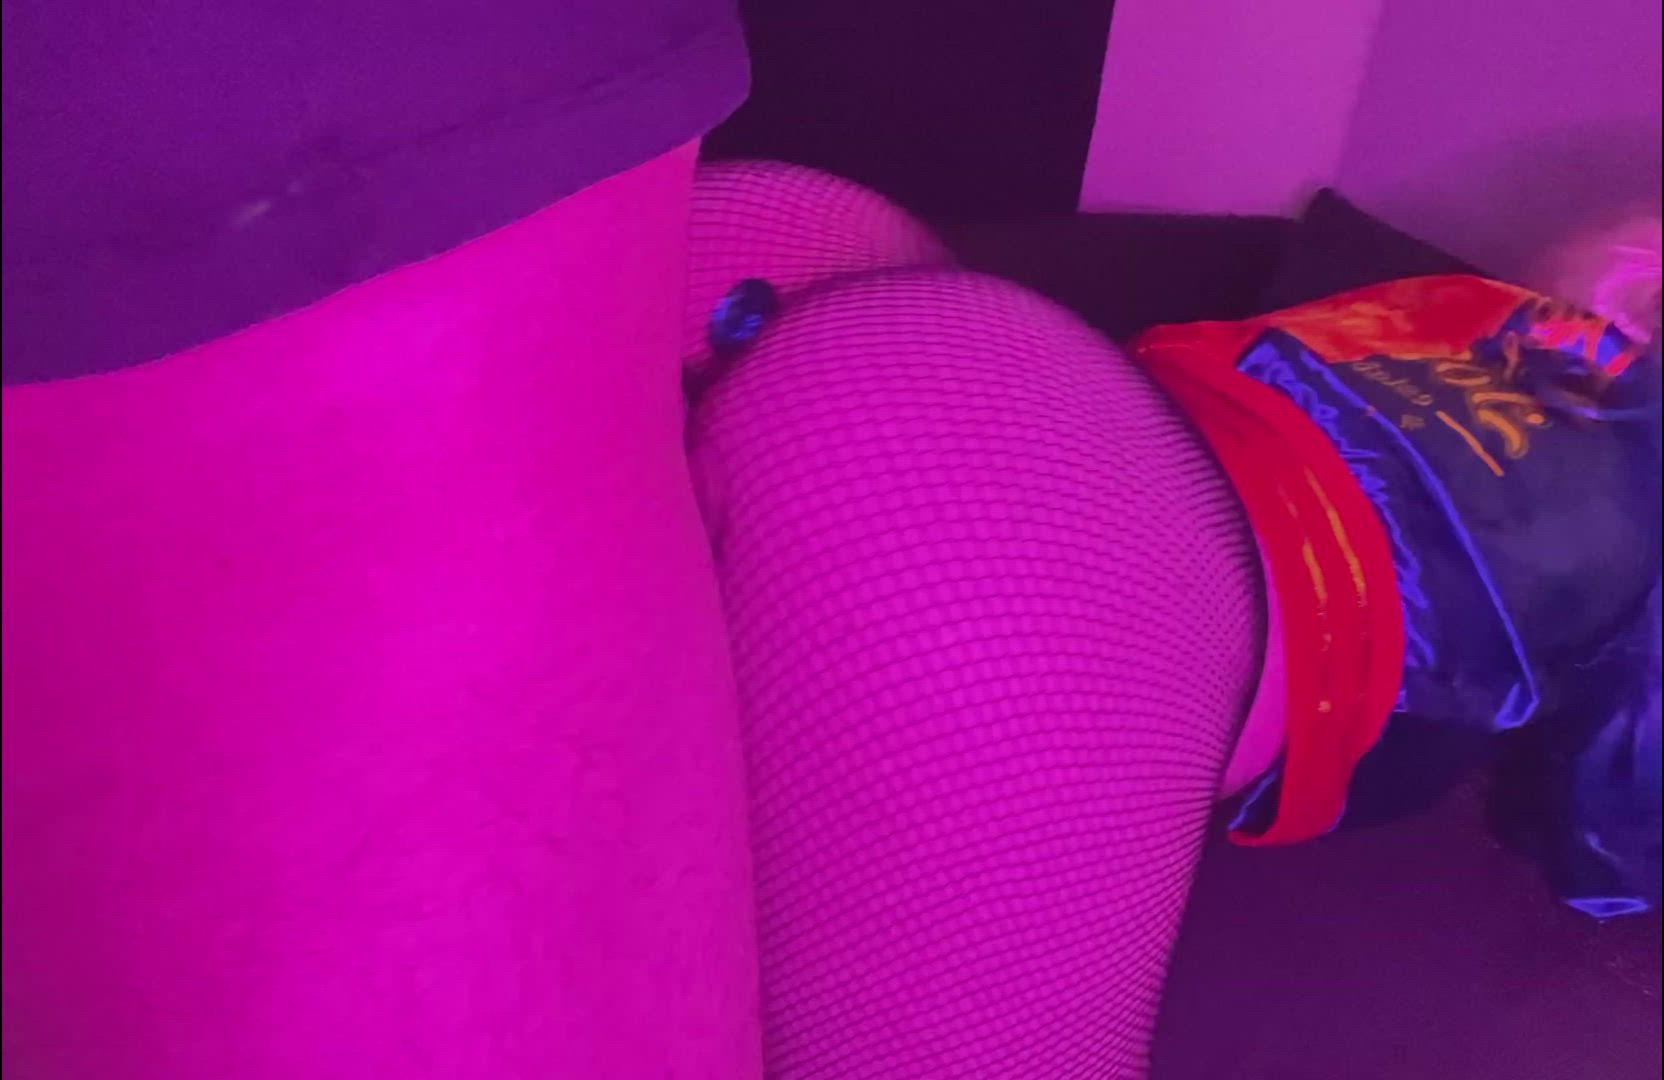 Amateur porn video with onlyfans model sweetariowo <strong>@arianabanks</strong>